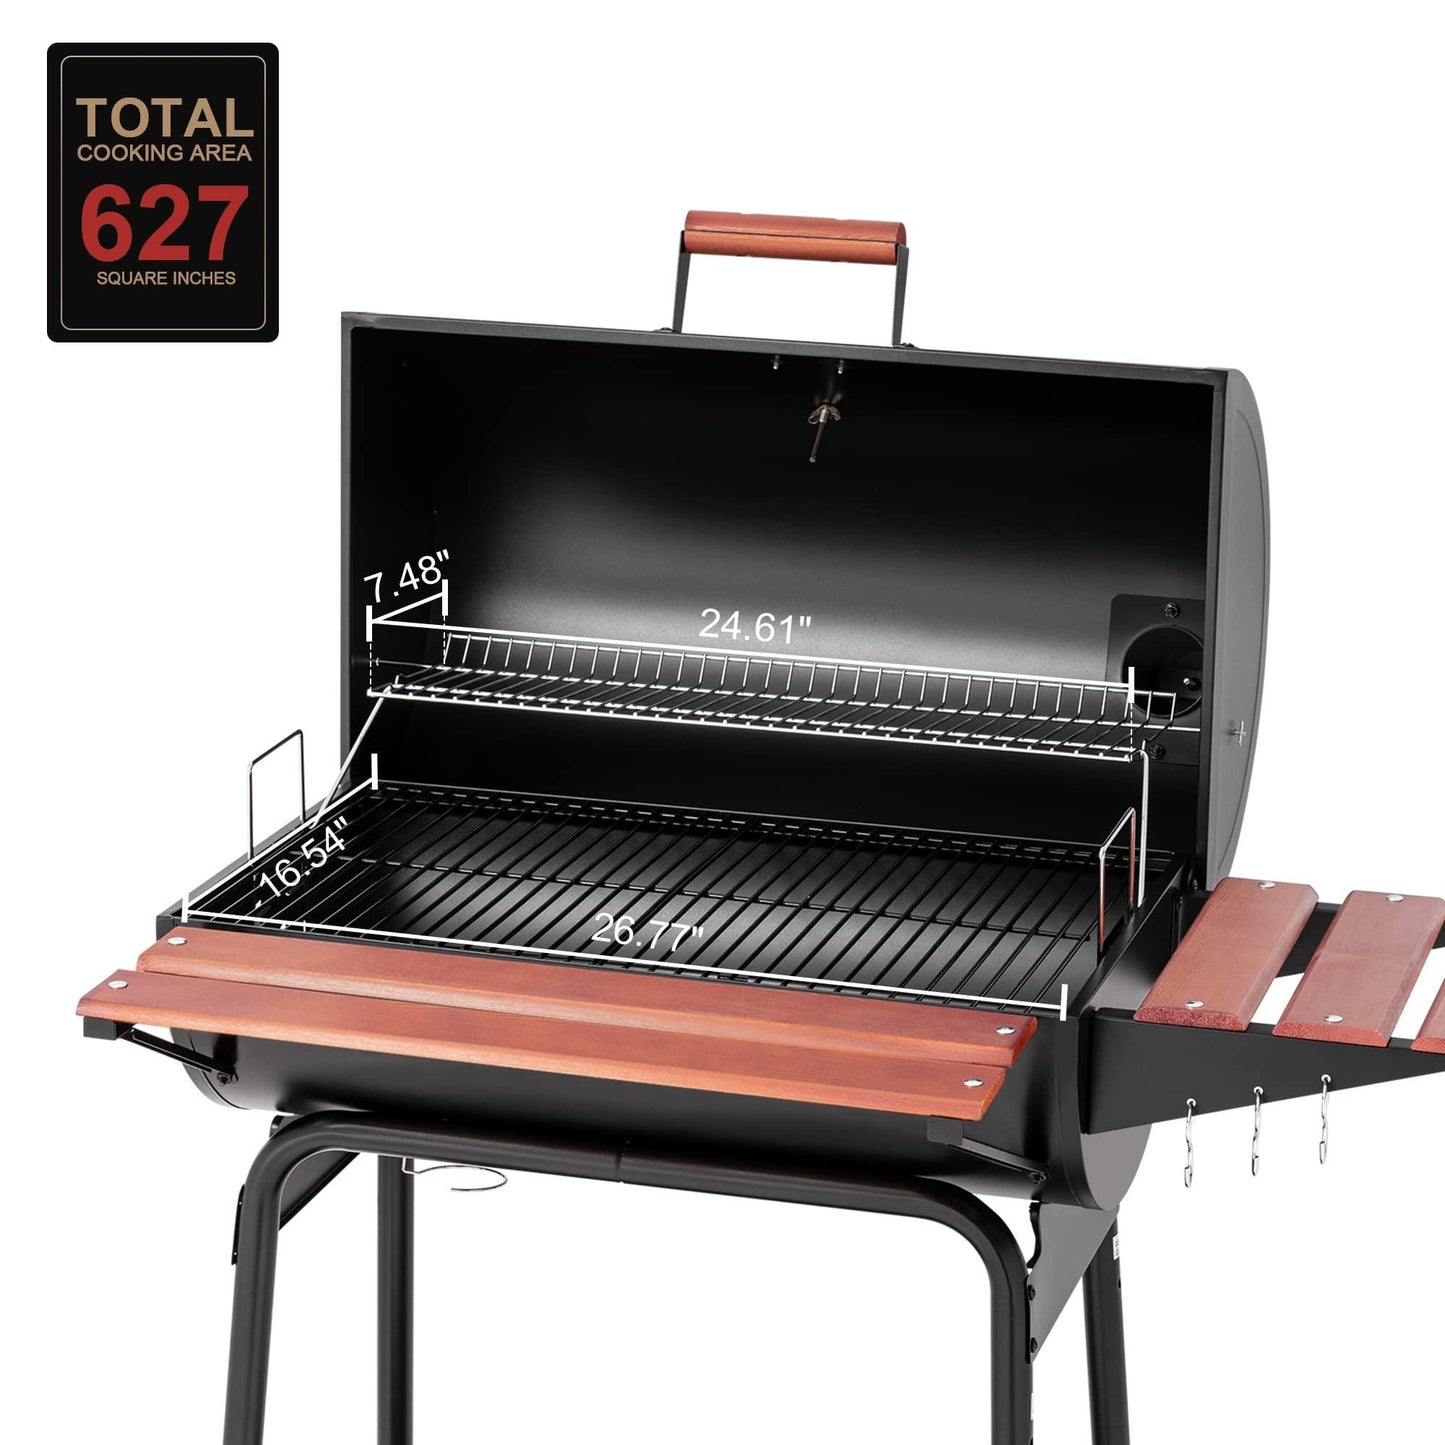 Royal Gourmet CC1830V 30 Barrel Charcoal Grill with Wood-Painted Side Front Table, 627 Square Inches Cooking Space, for Outdoor Backyard, Patio and Parties, Black - CookCave